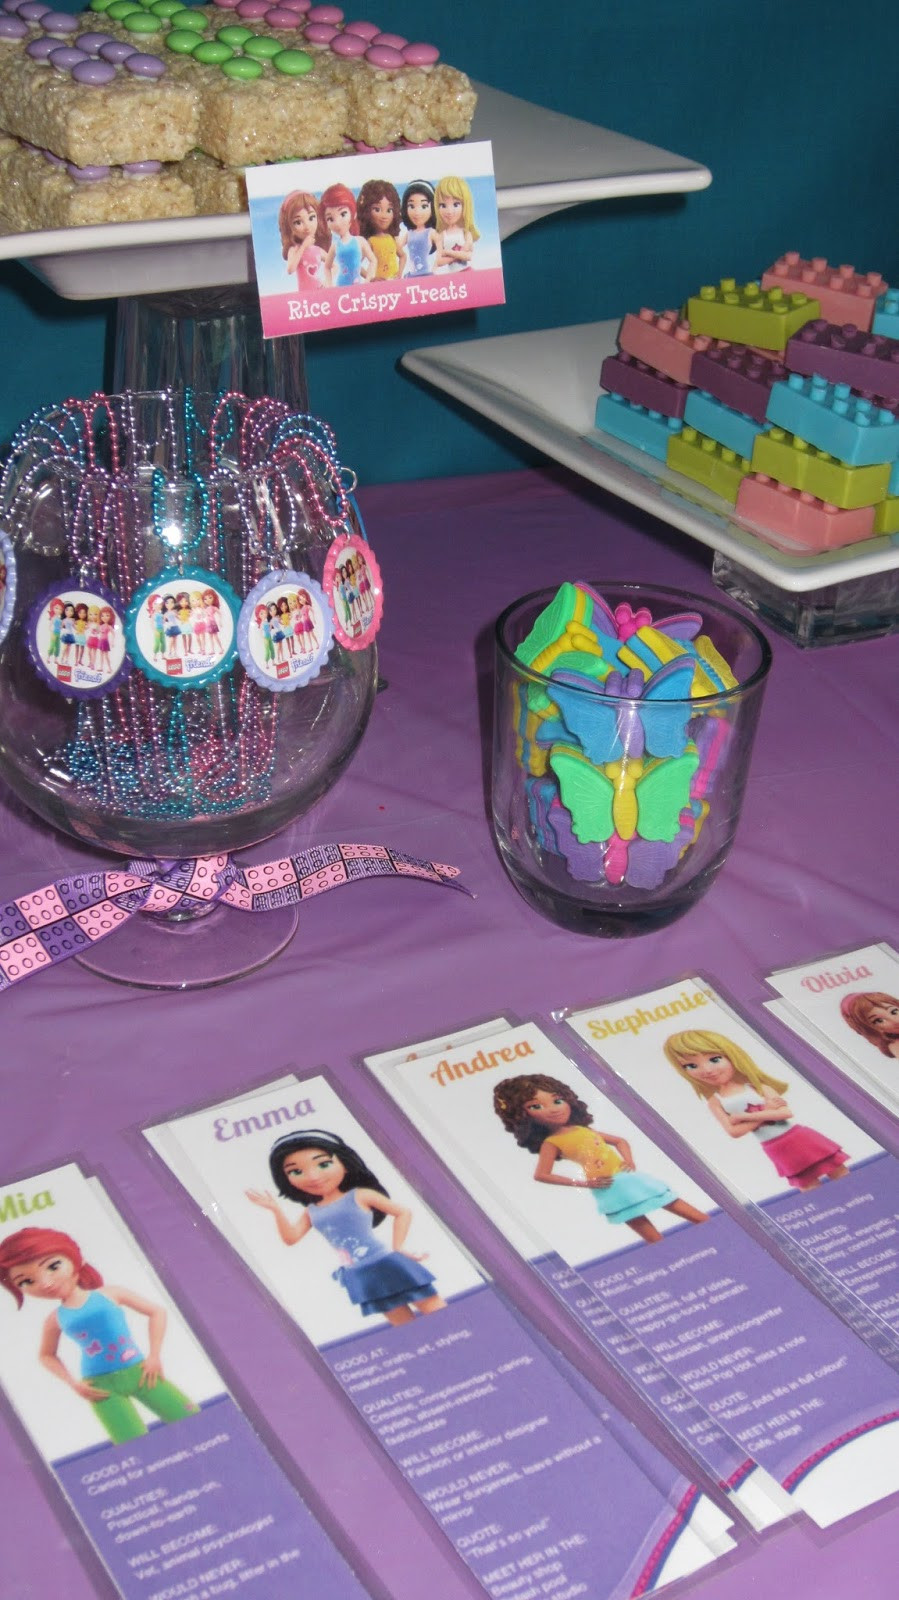 Lego Friends Birthday Party Supplies
 Party at the Beech Emily s Lego Friends Birthday Party